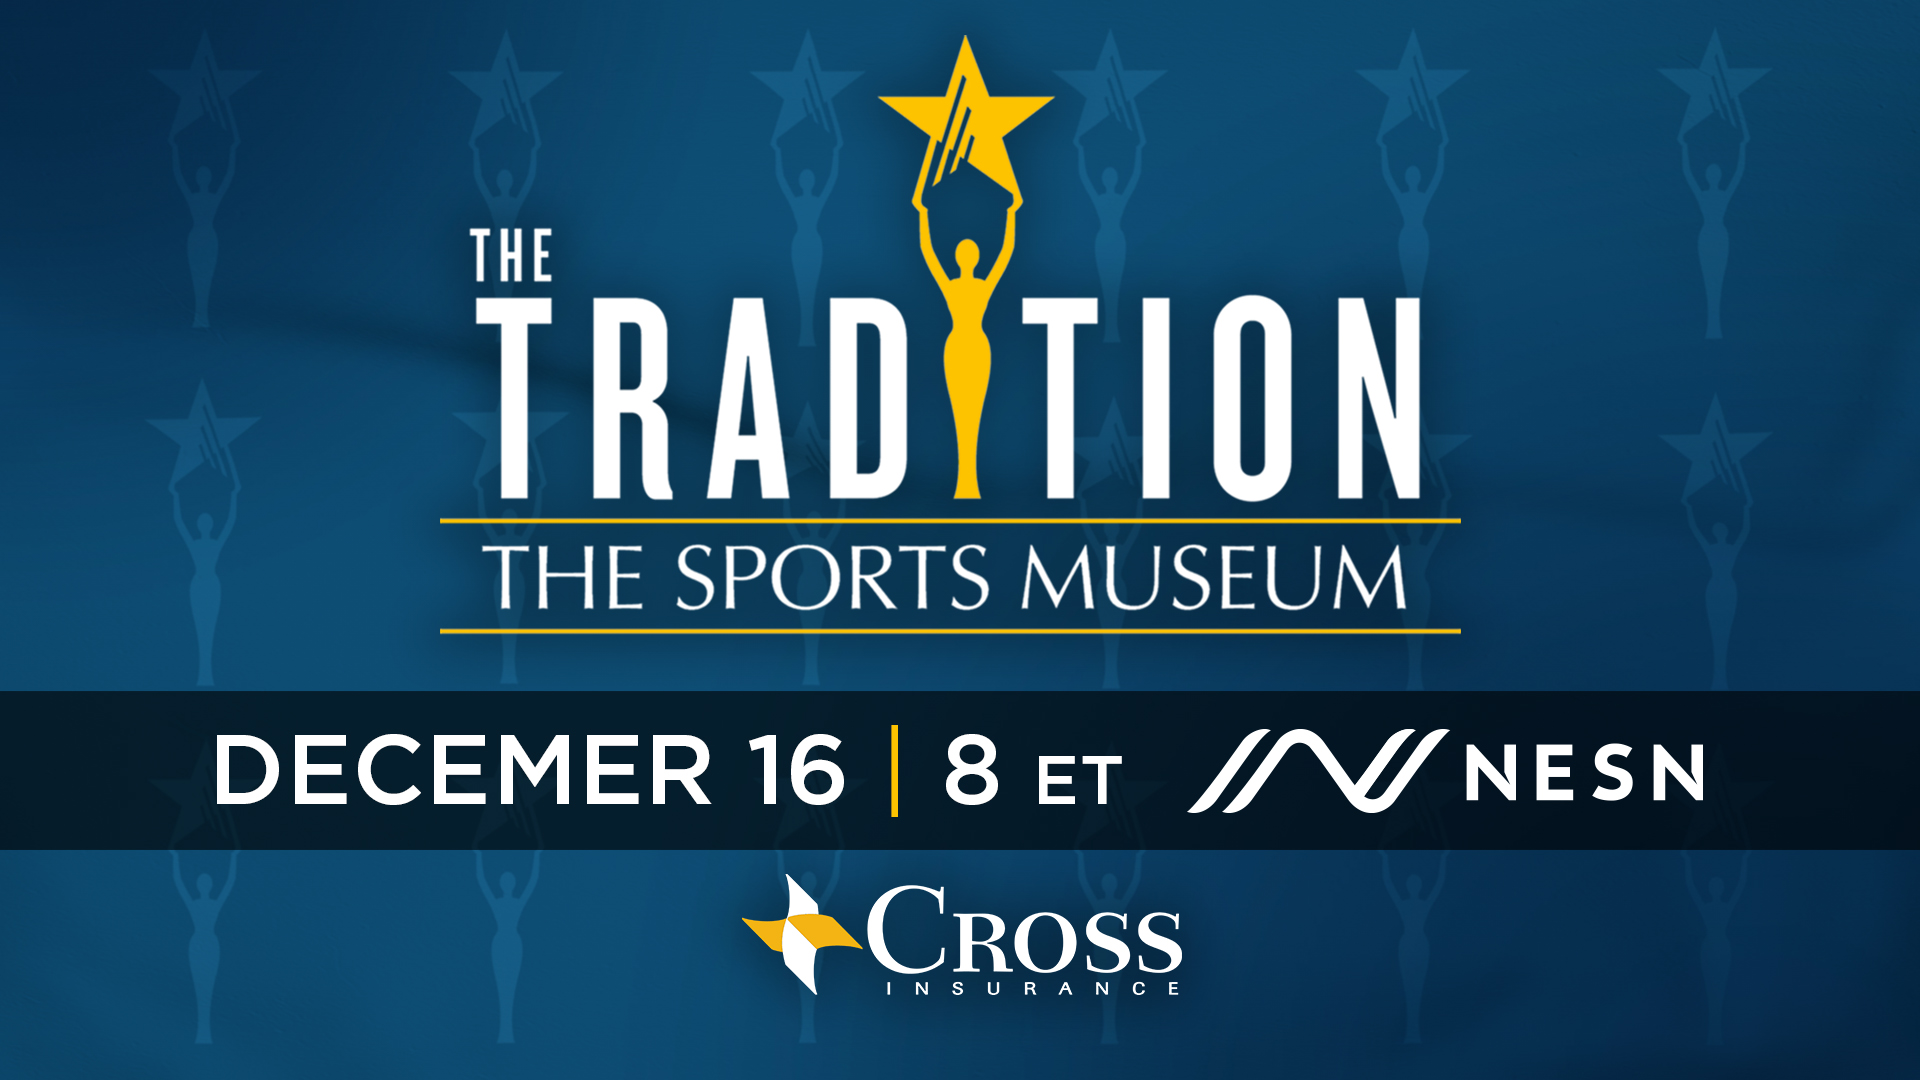 NESN To Air 19th Annual ‘Tradition’ Wednesday Night